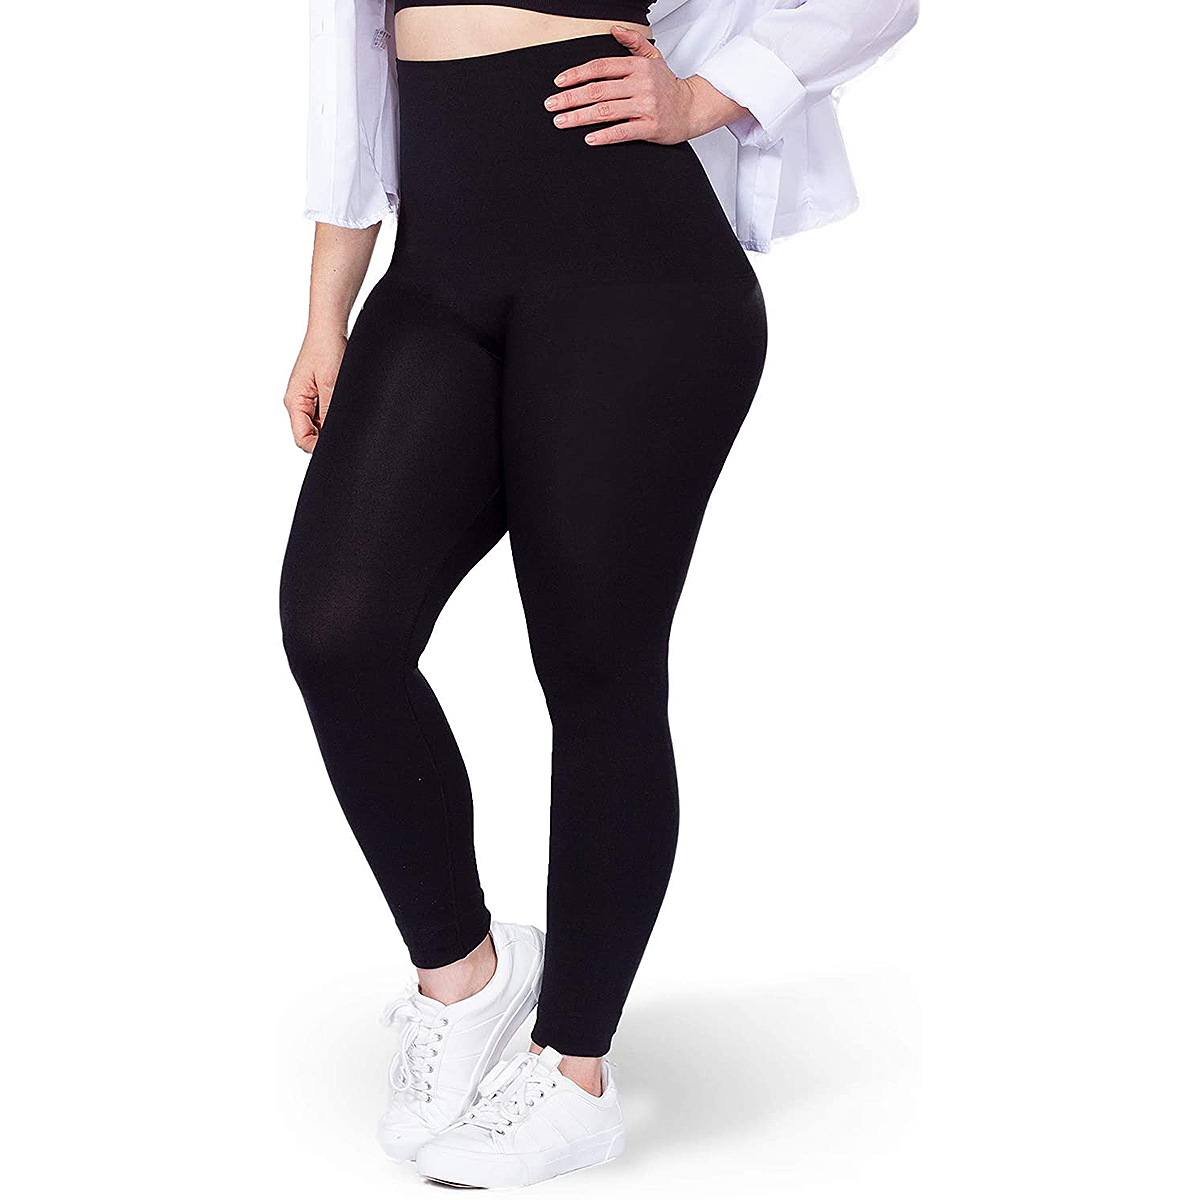 Are AntiCellulite Leggings Effective and How They Differ Review